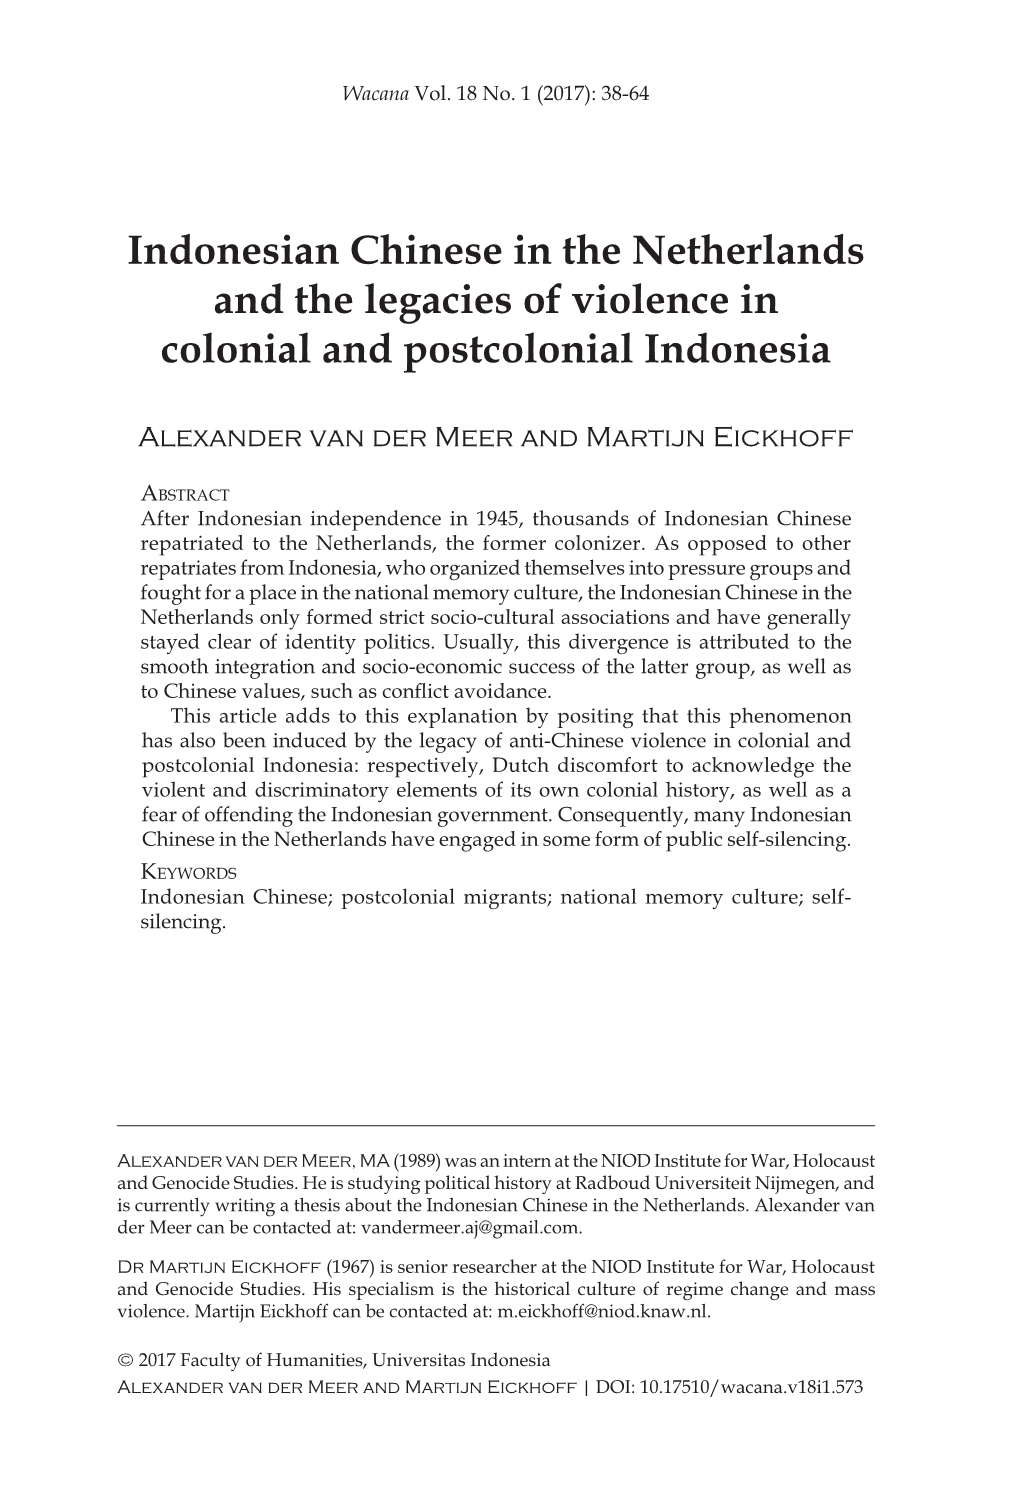 Indonesian Chinese in the Netherlands and the Legacies of Violence in Colonial and Postcolonial Indonesia